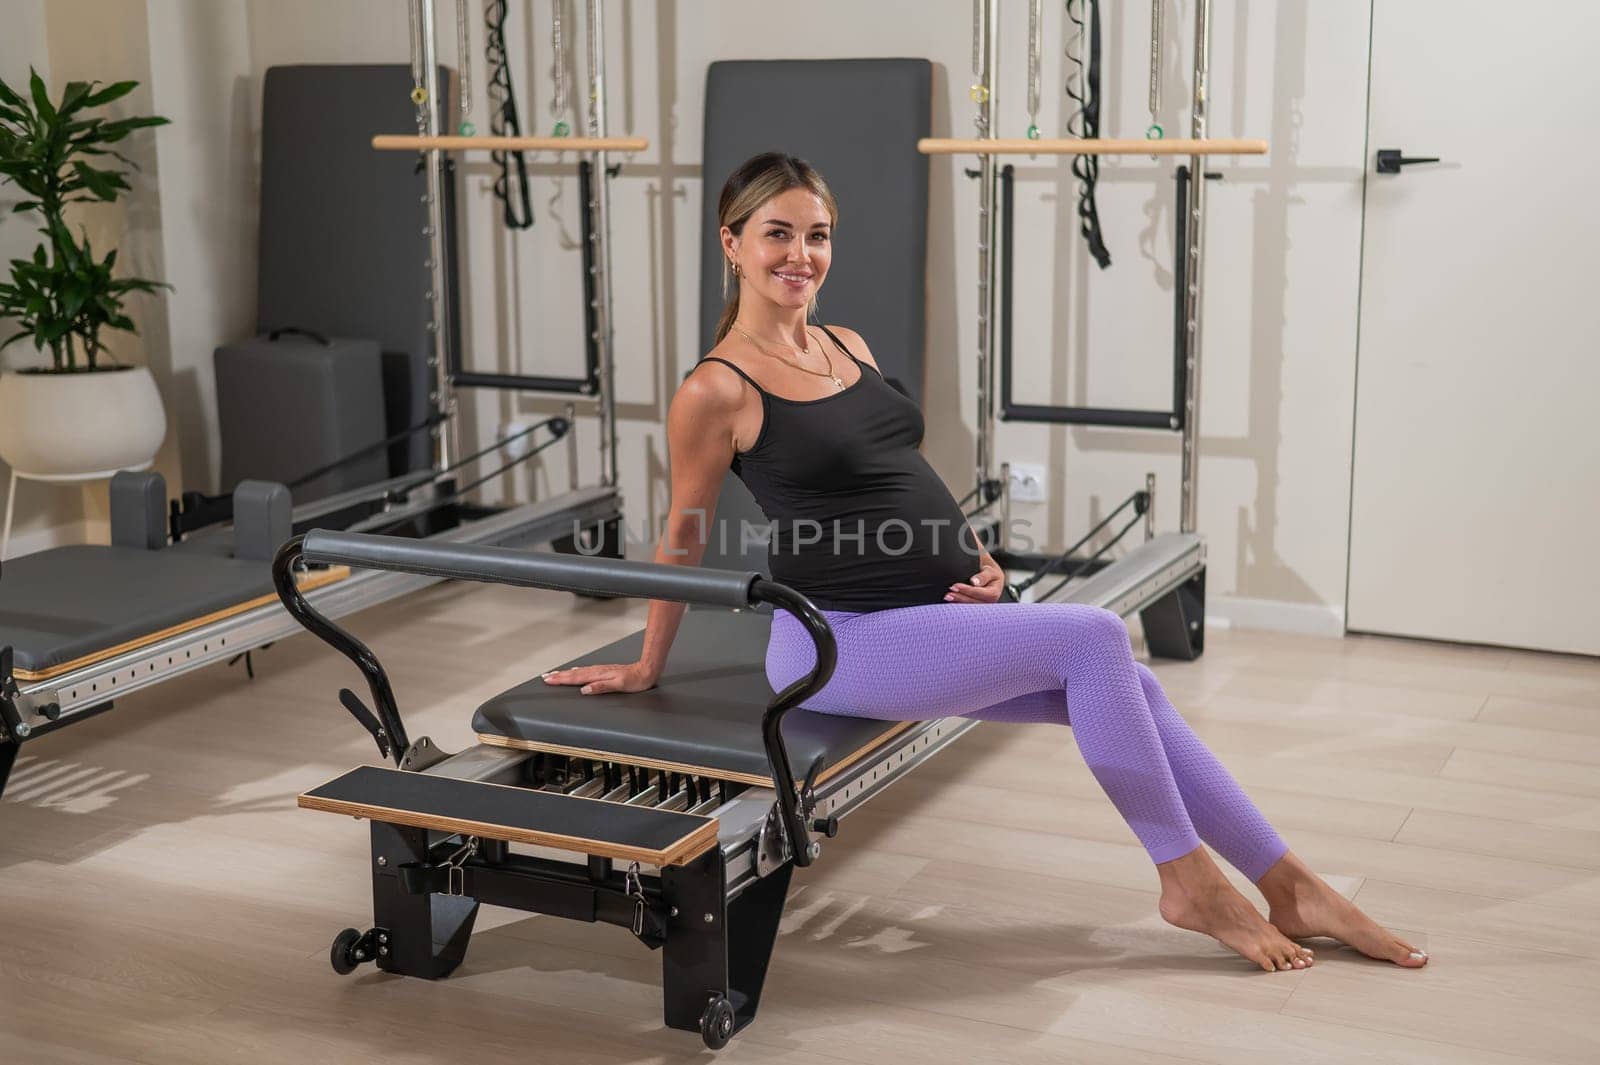 Pregnant woman resting after Pilates on a reformer machine. by mrwed54